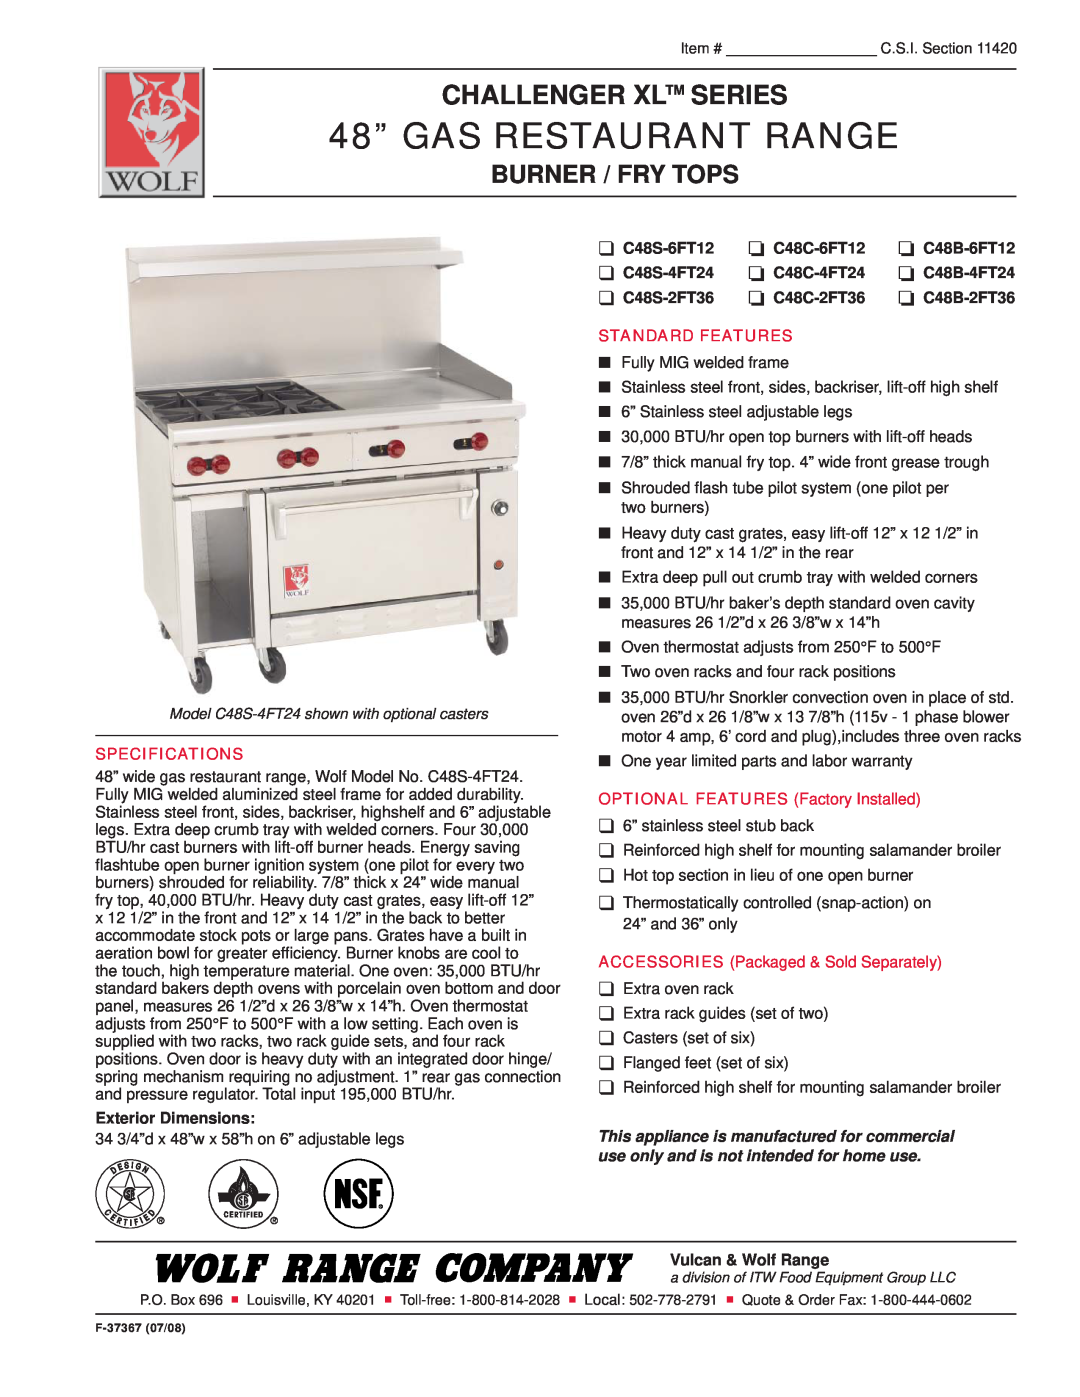 Wolf C48C-2FT36 specifications 48” GAS RESTAURANT RANGE, Challenger Xl Series, Burner / Fry Tops, Specifications 